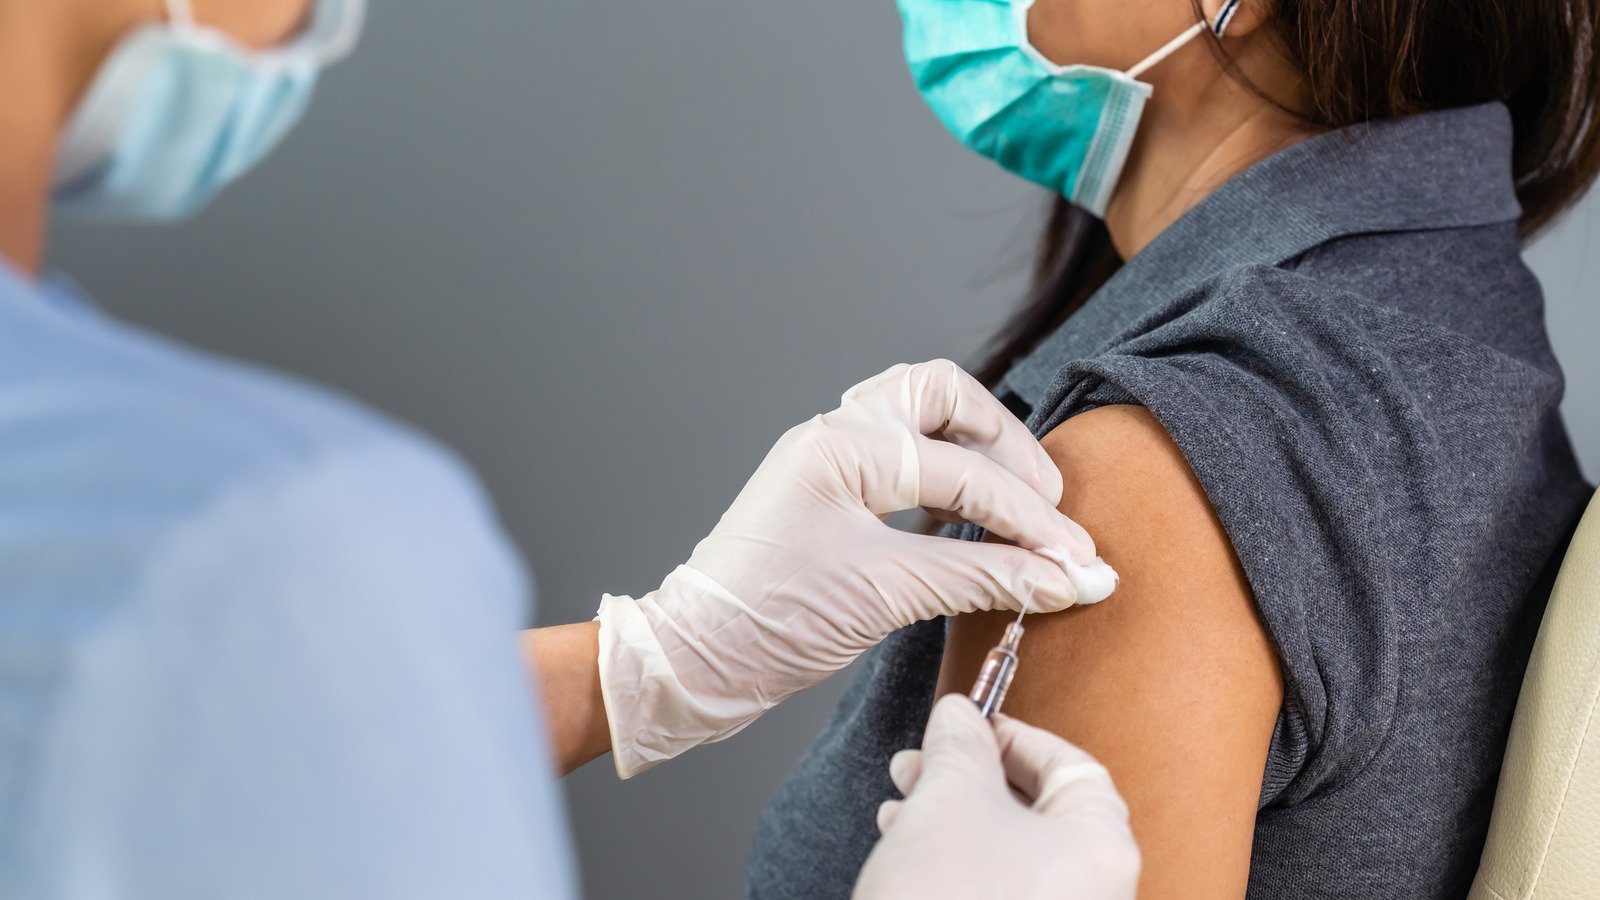 The Real Reason You Should Still Wear A Mask After A COVID-19 Vaccine